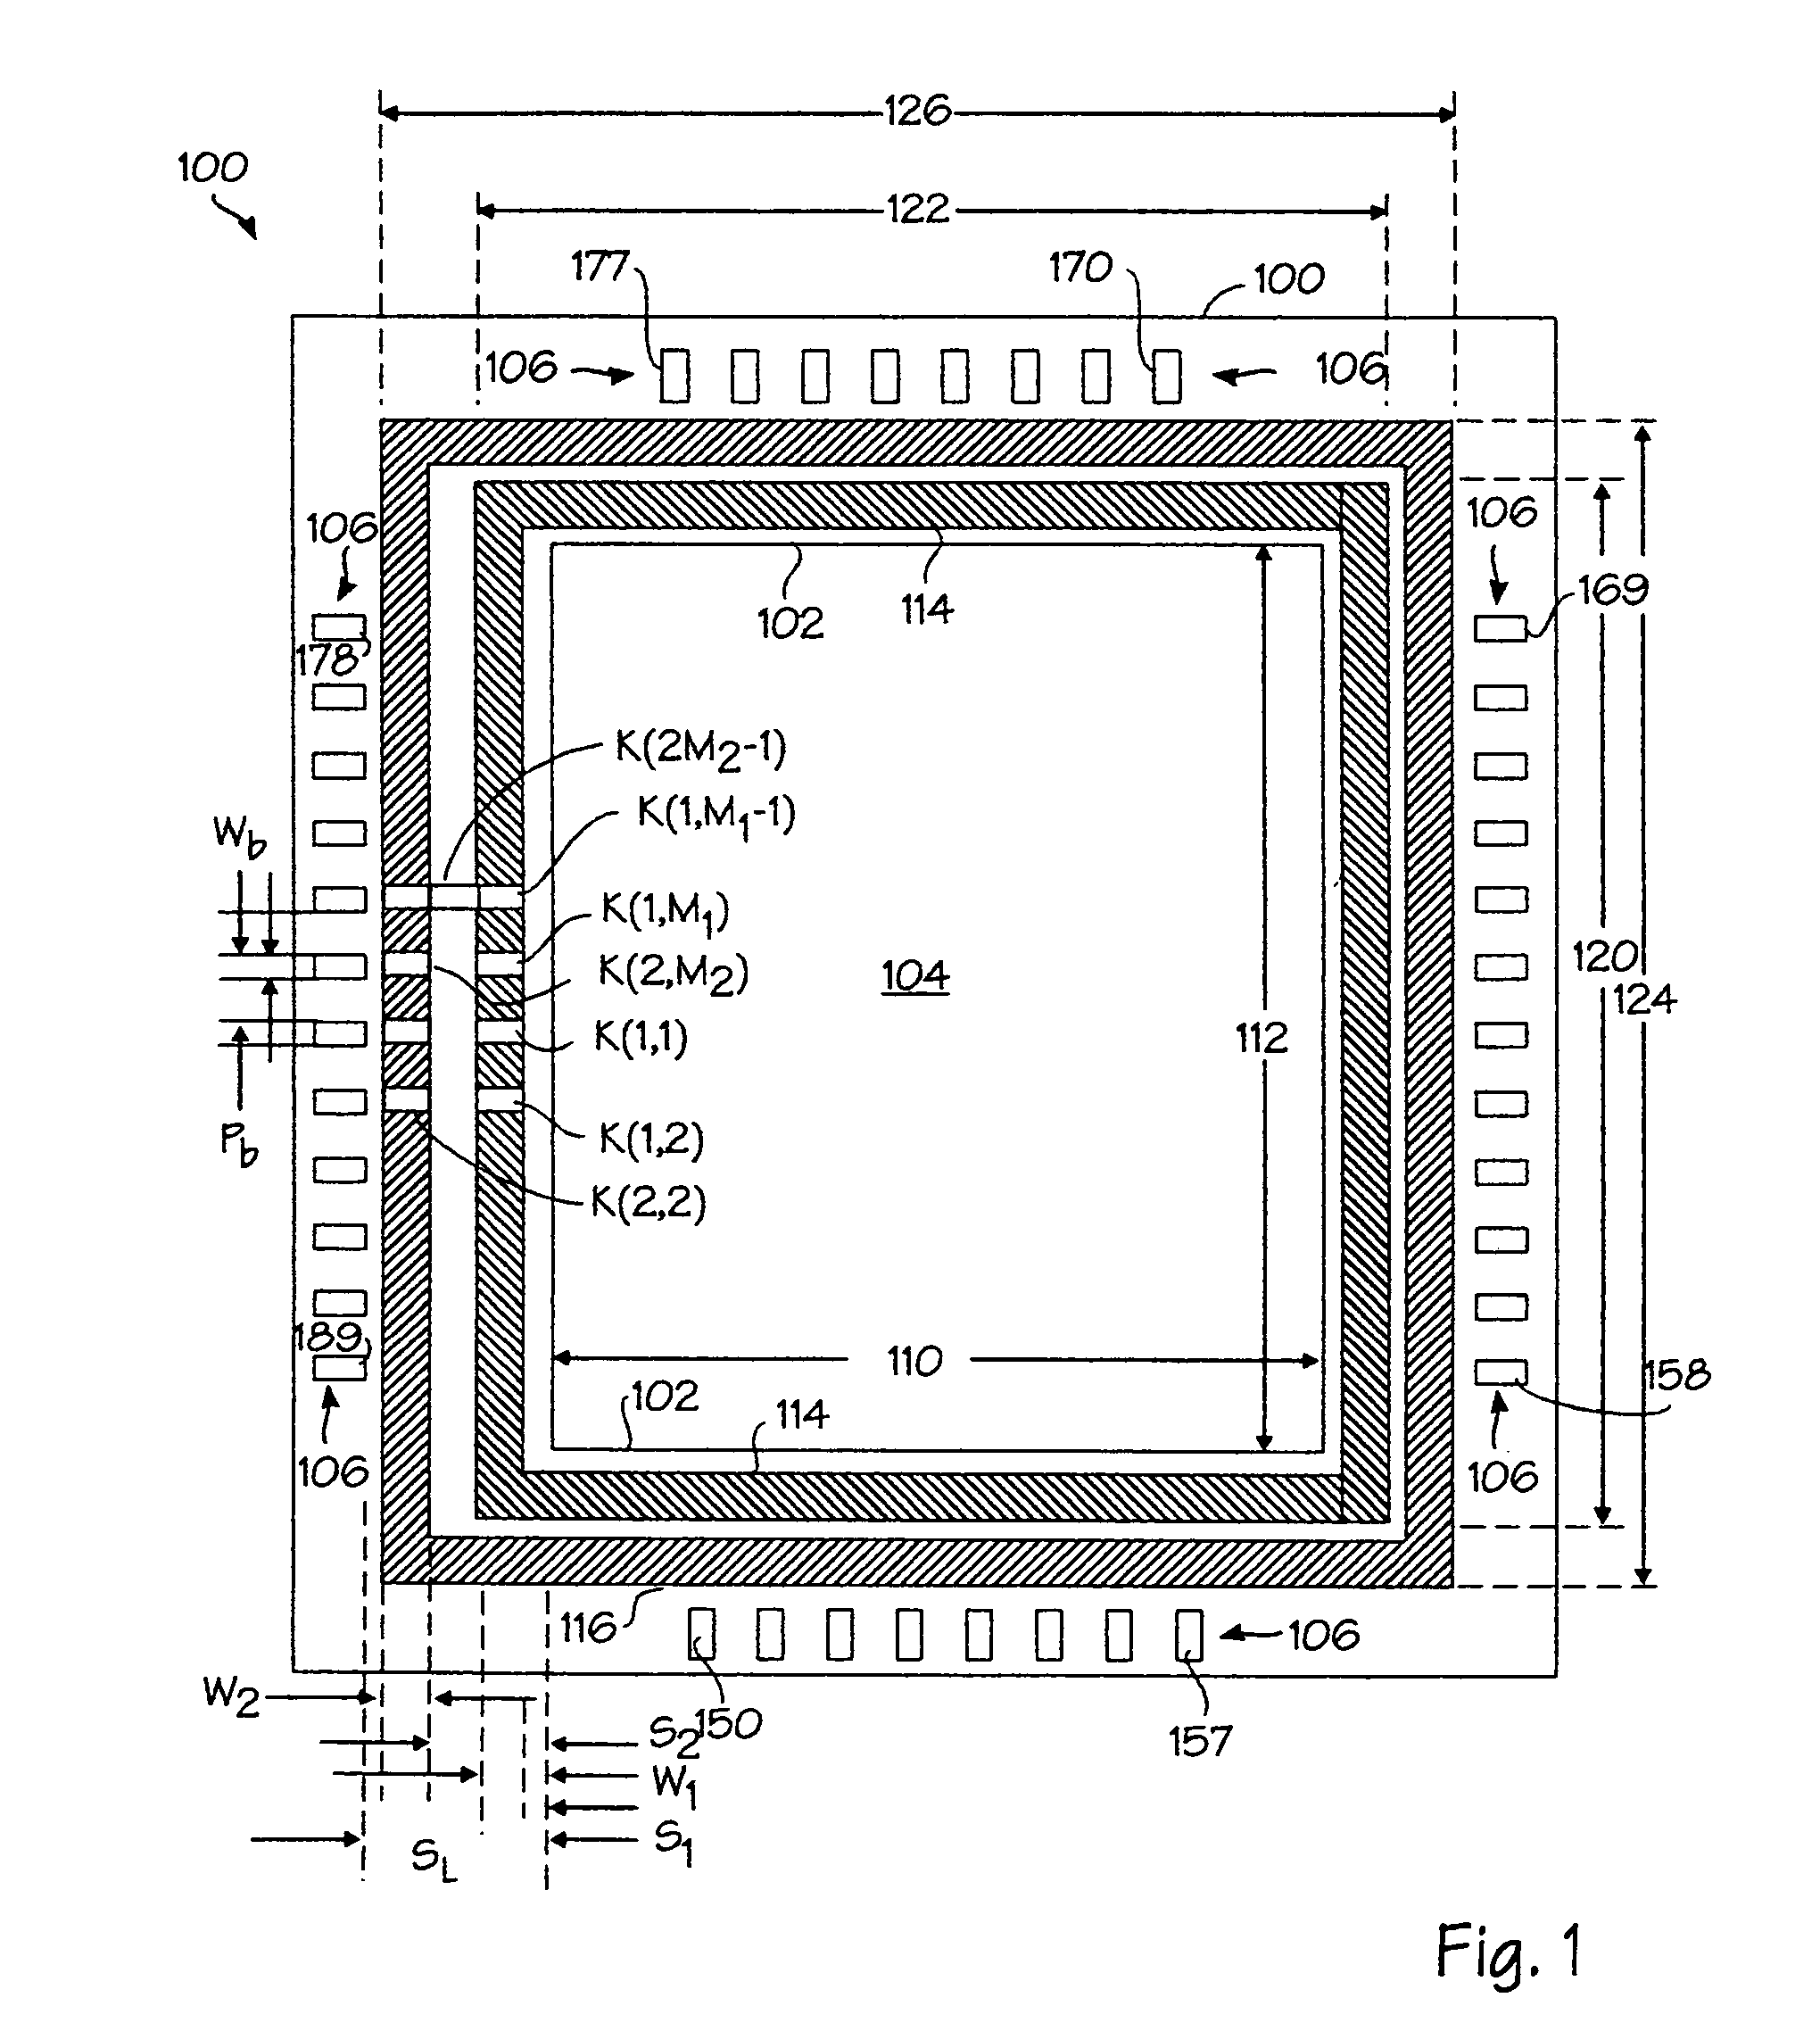 Multi-power ring chip scale package for system level integration